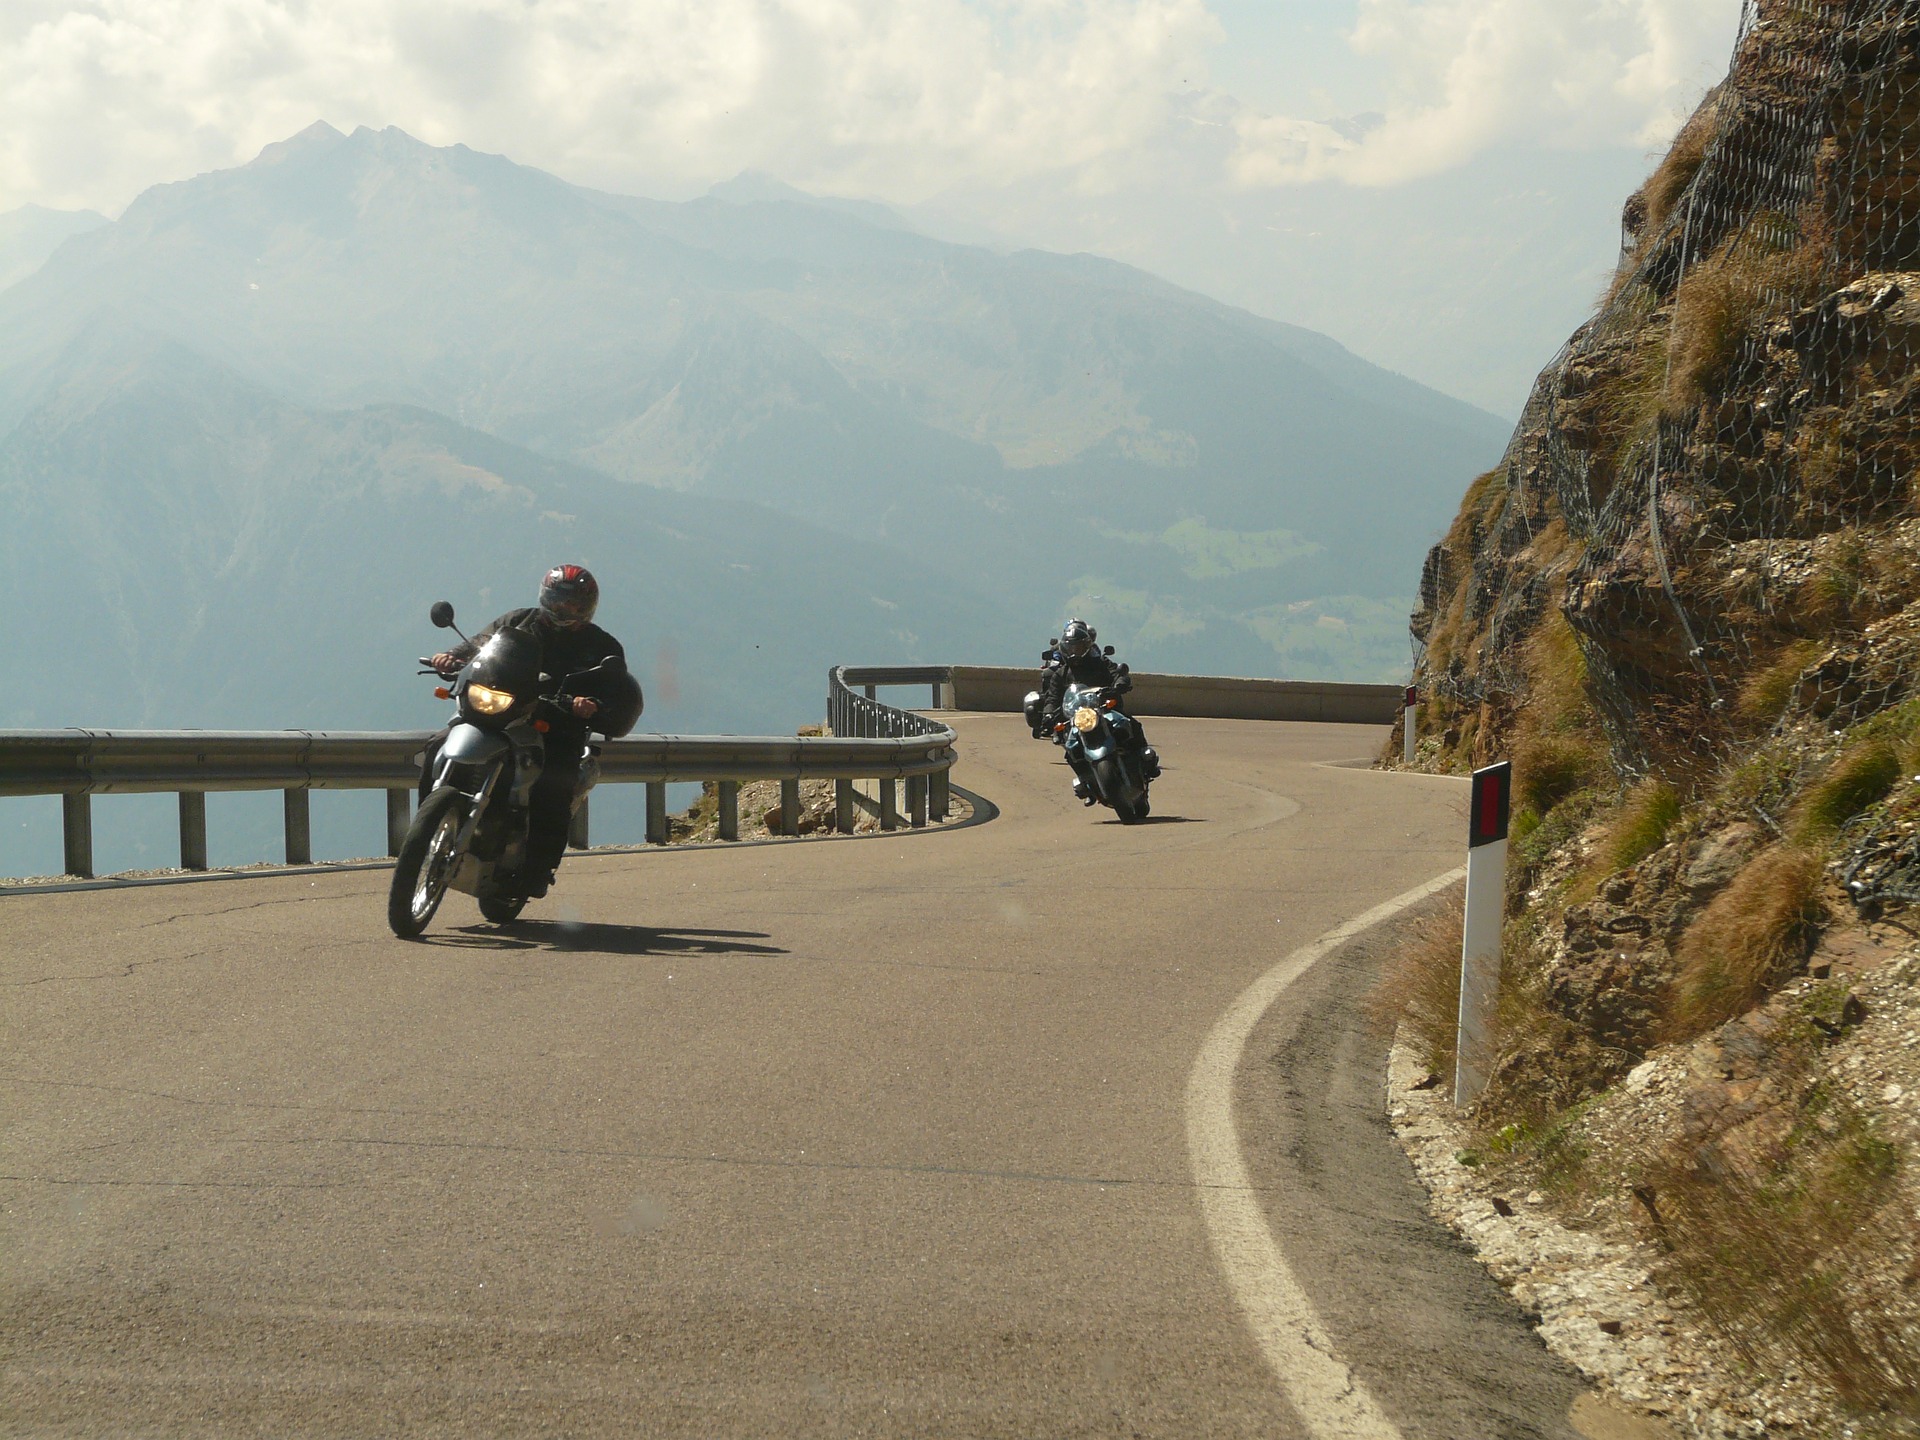 two motorcycles on a winding mountain road